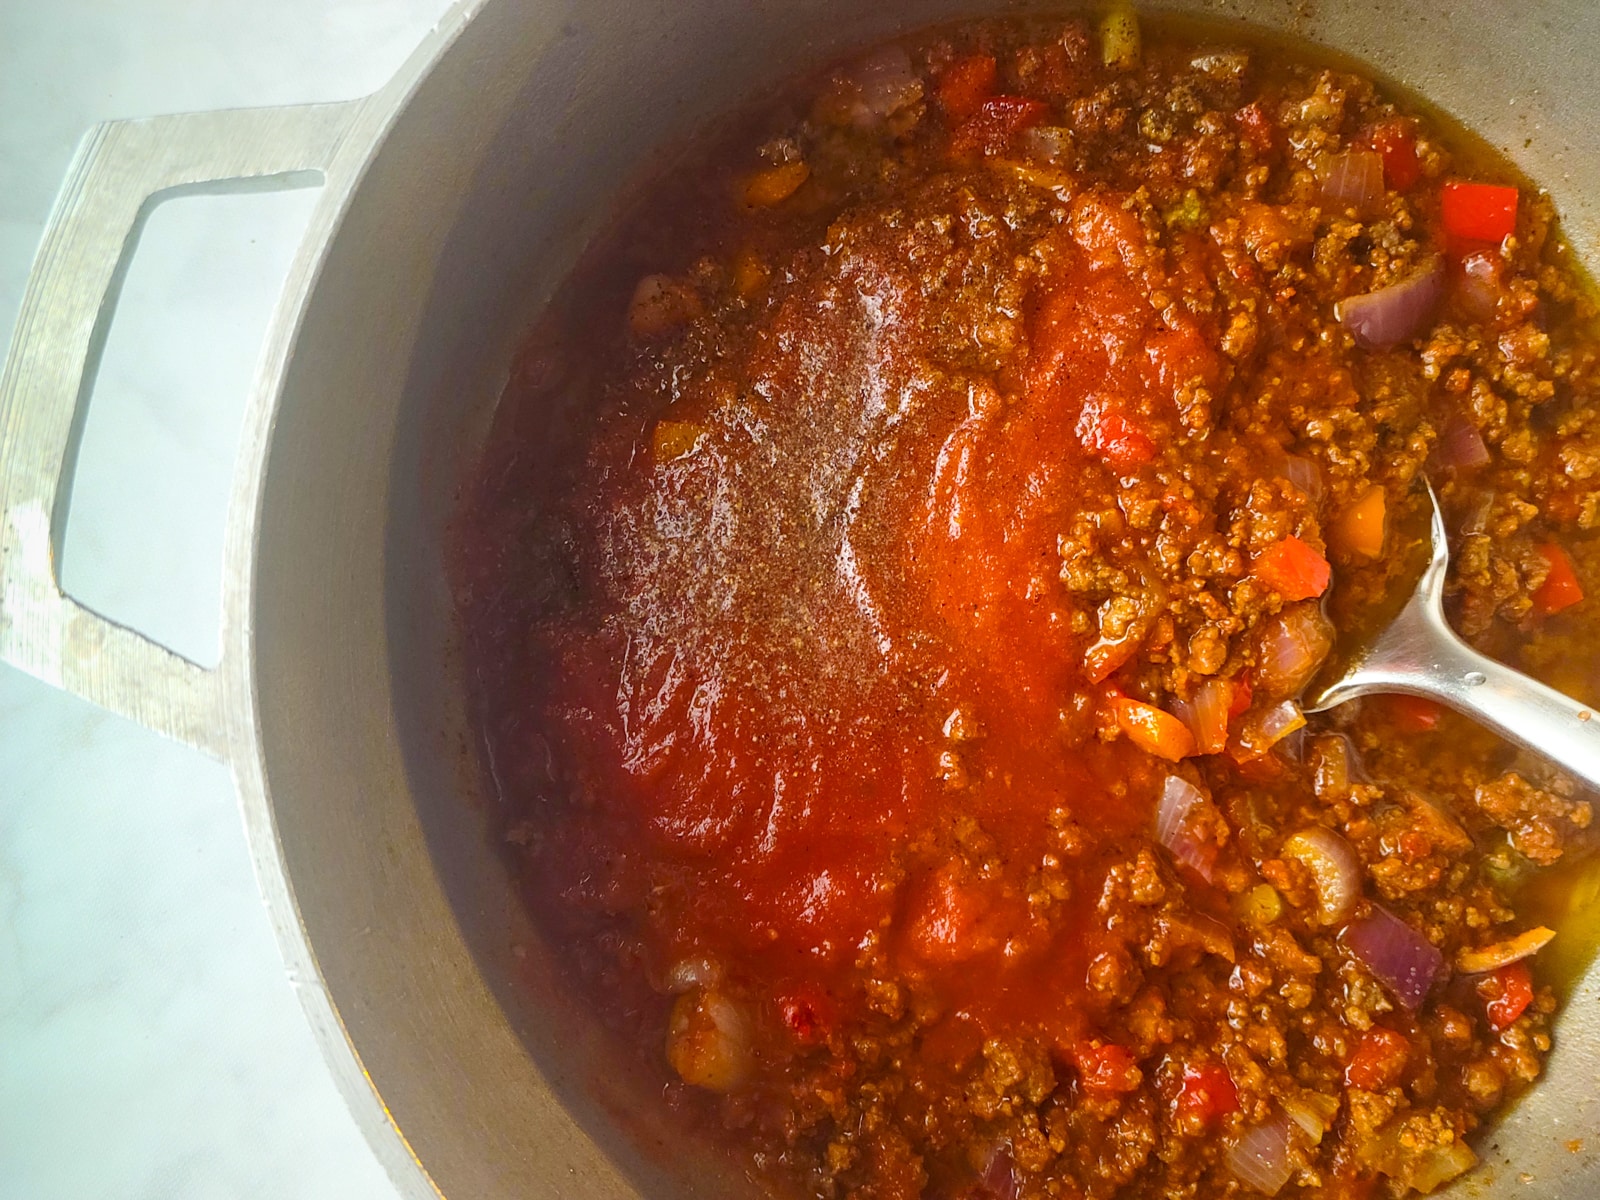 The tomato sauce added to the pot.